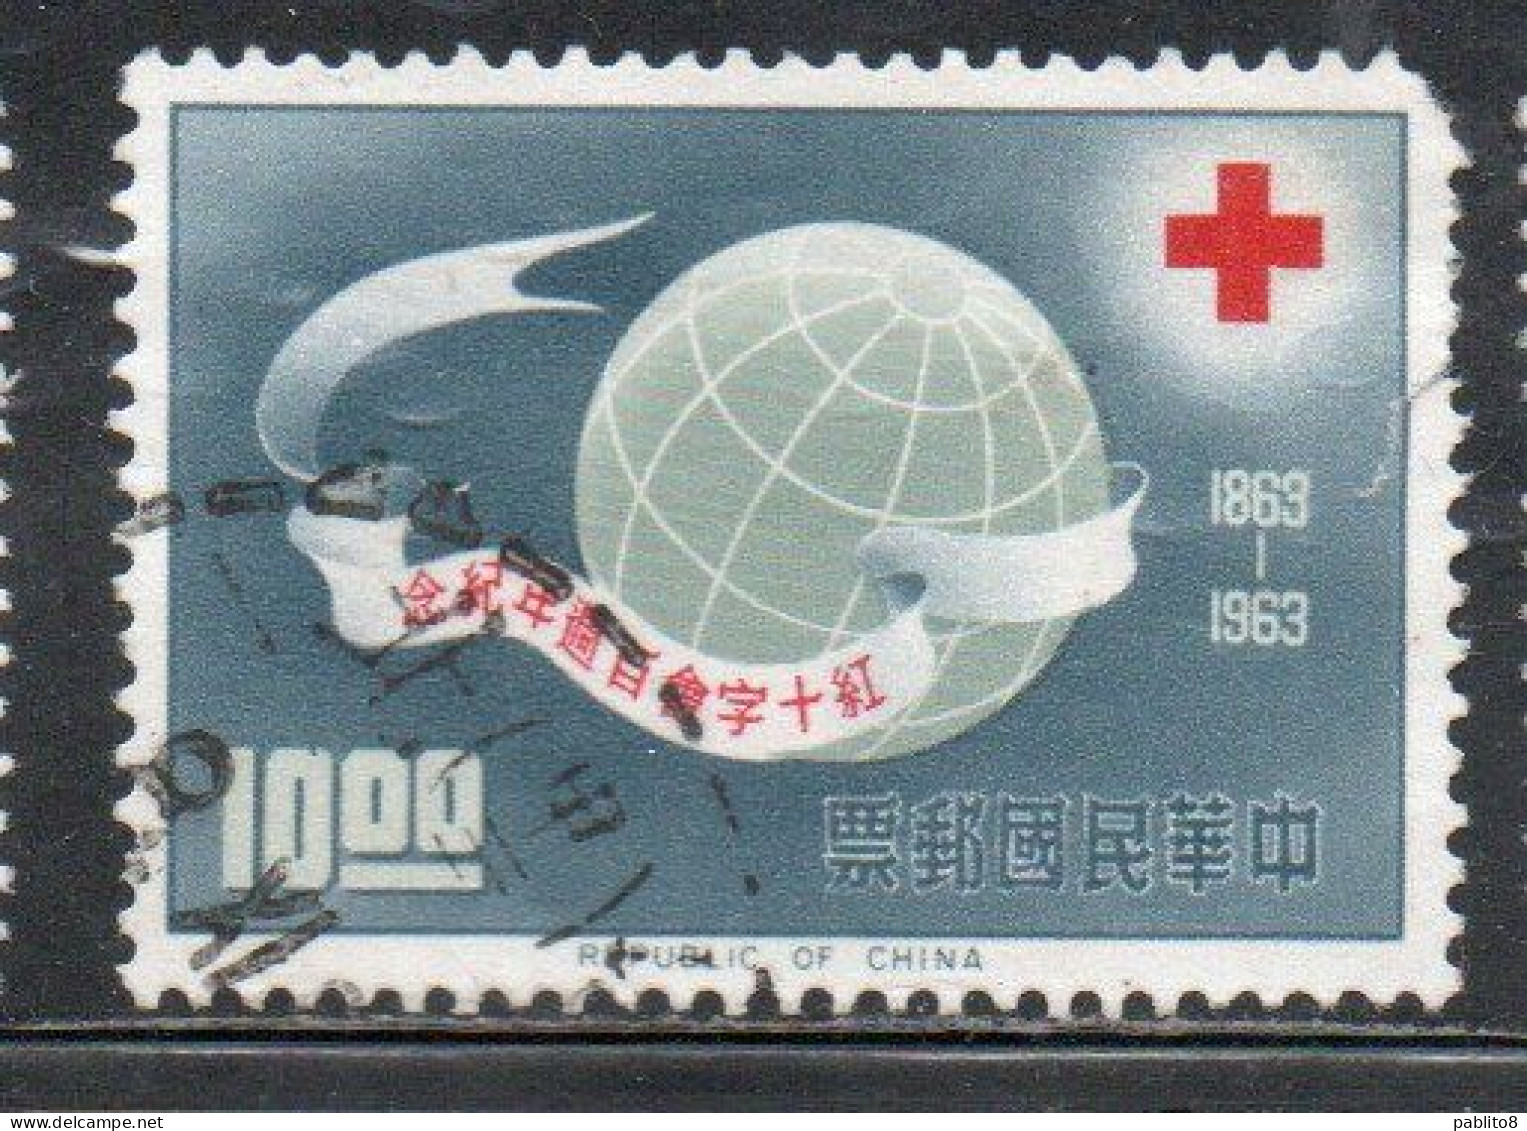 CHINA REPUBLIC CINA TAIWAN FORMOSA 1963 CENTENARY OF RED CROSS GLOBE CROIX ROUGE CROCE ROSSA 10$ USED USATO OBLITERE' - Oblitérés